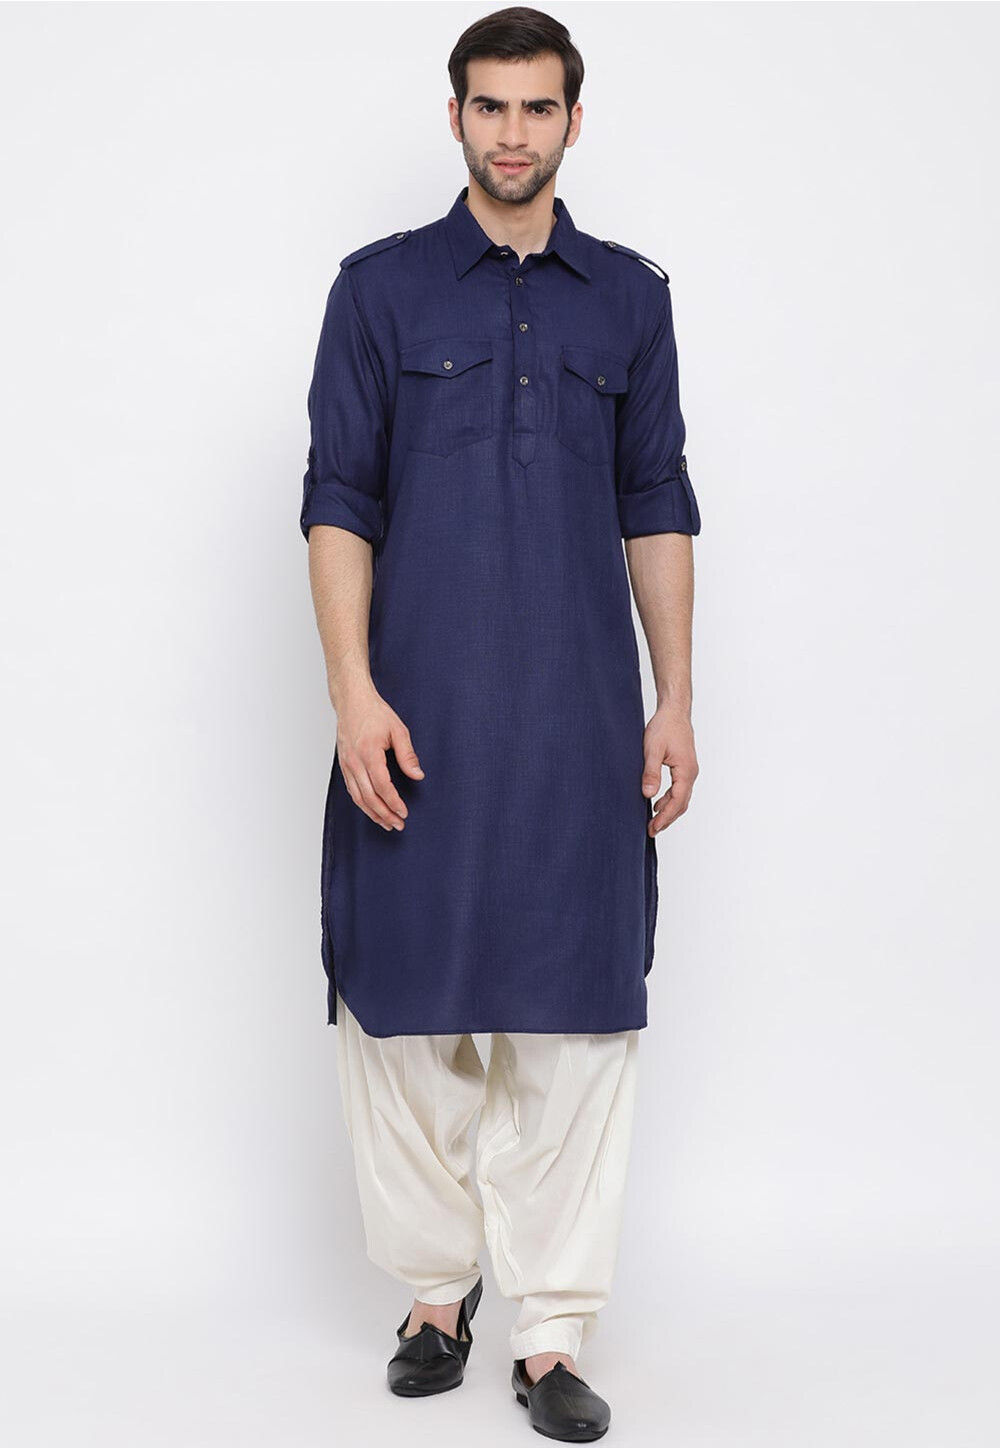 from Kurta Pajama to Bandhgala Suit, 10 Diwali Outfits for Boys